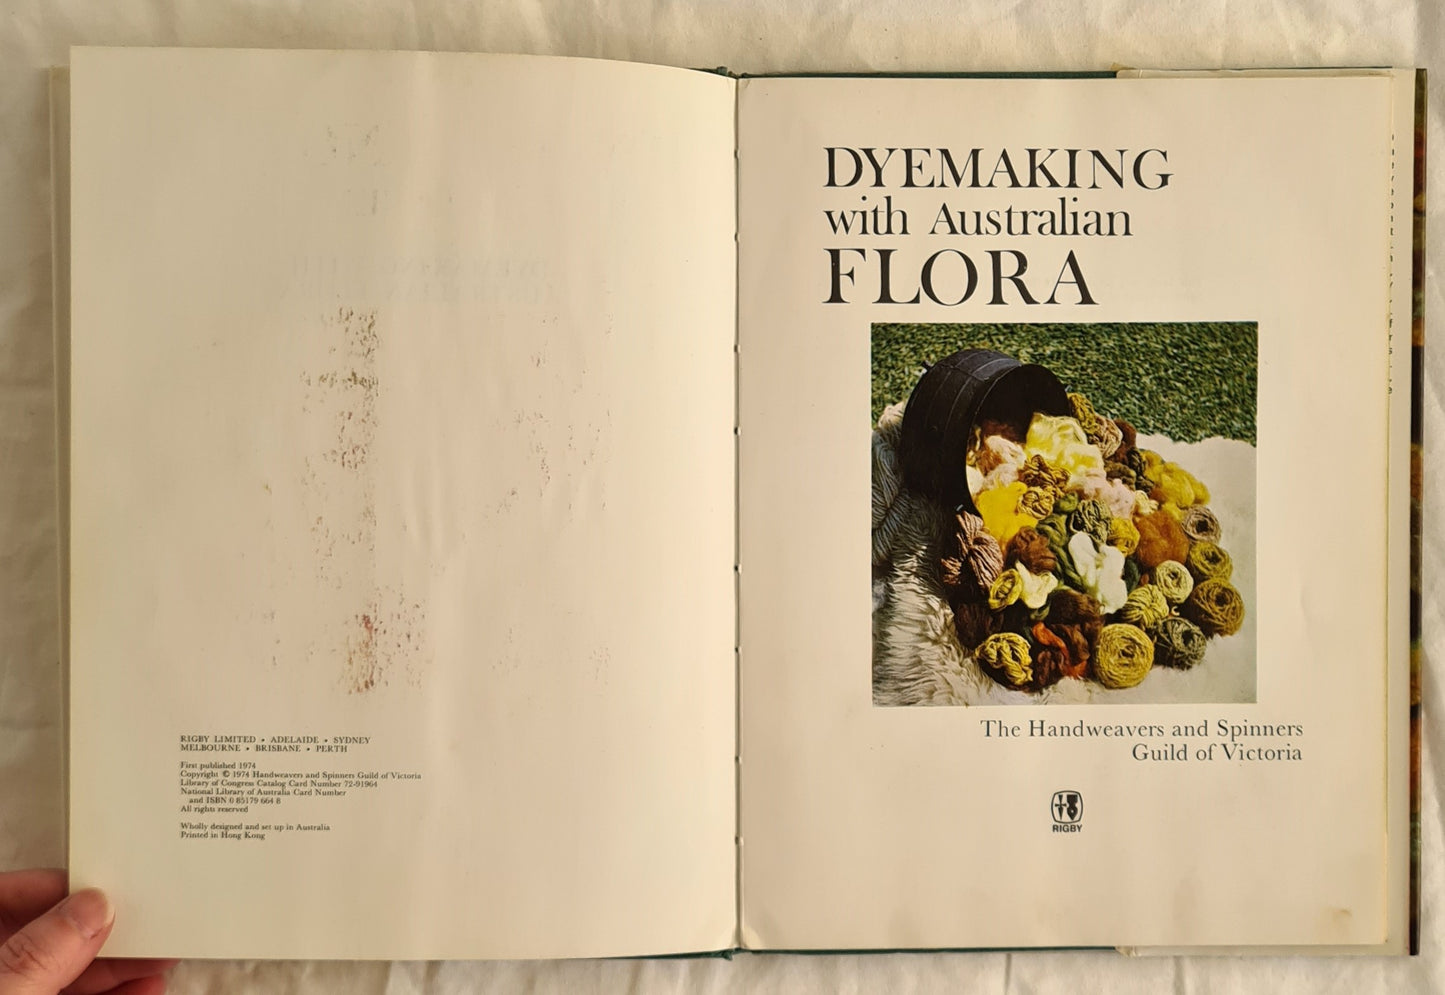 Dyemaking with Australian Flora by The Handweavers and Spinners Guild of Victoria